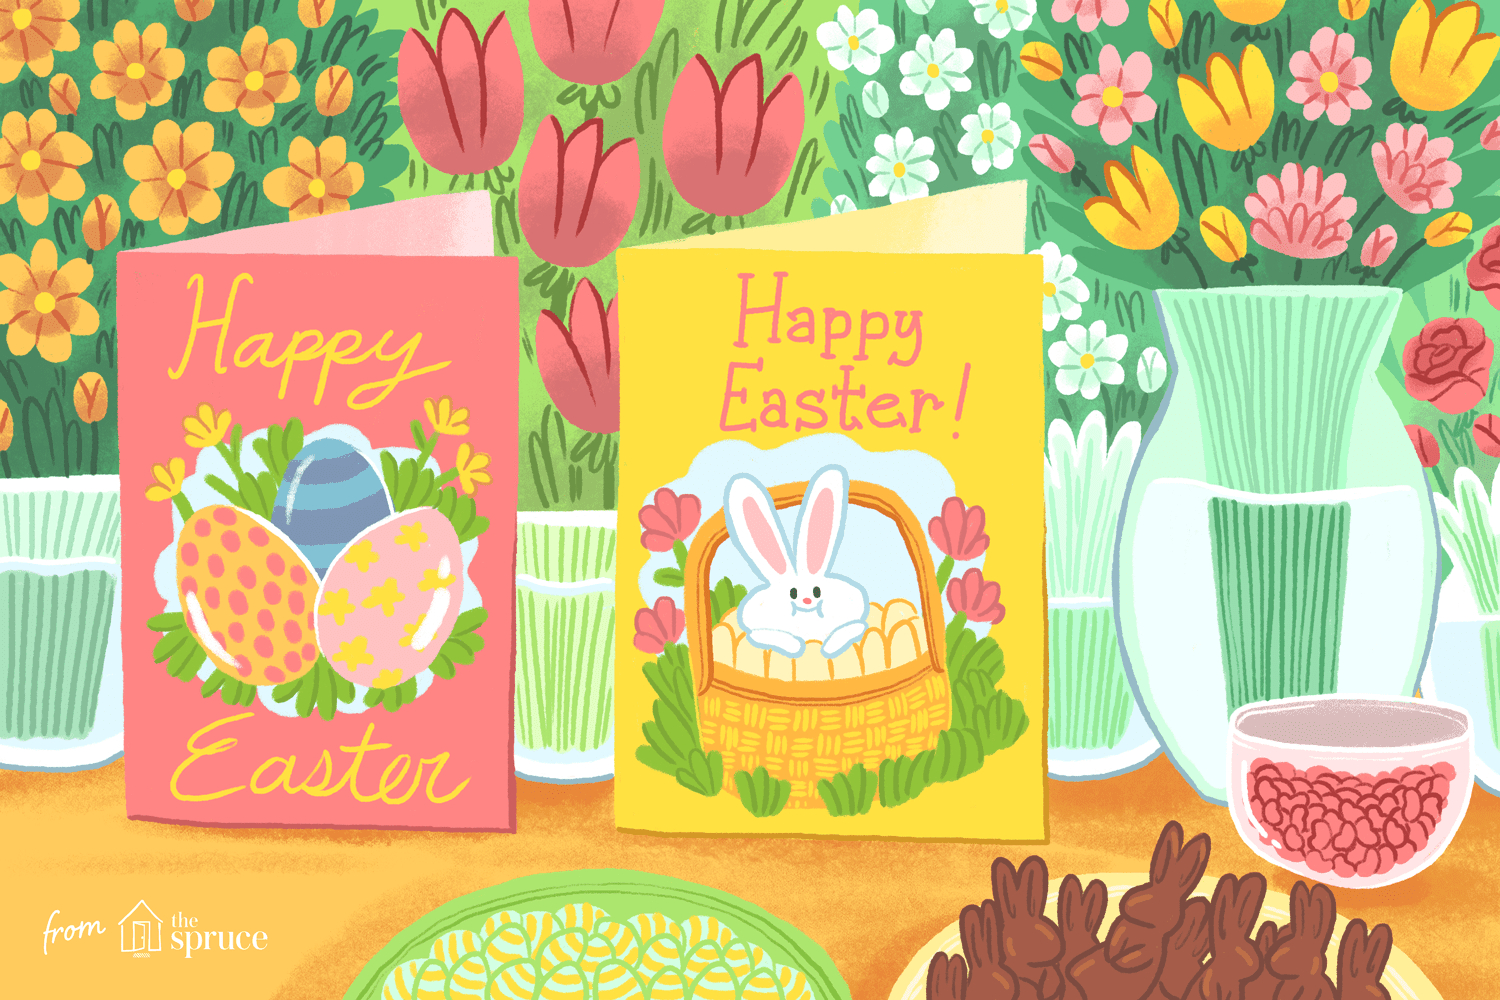 12 Free, Printable Easter Cards For Everyone You Know - Free Printable Easter Cards For Grandchildren